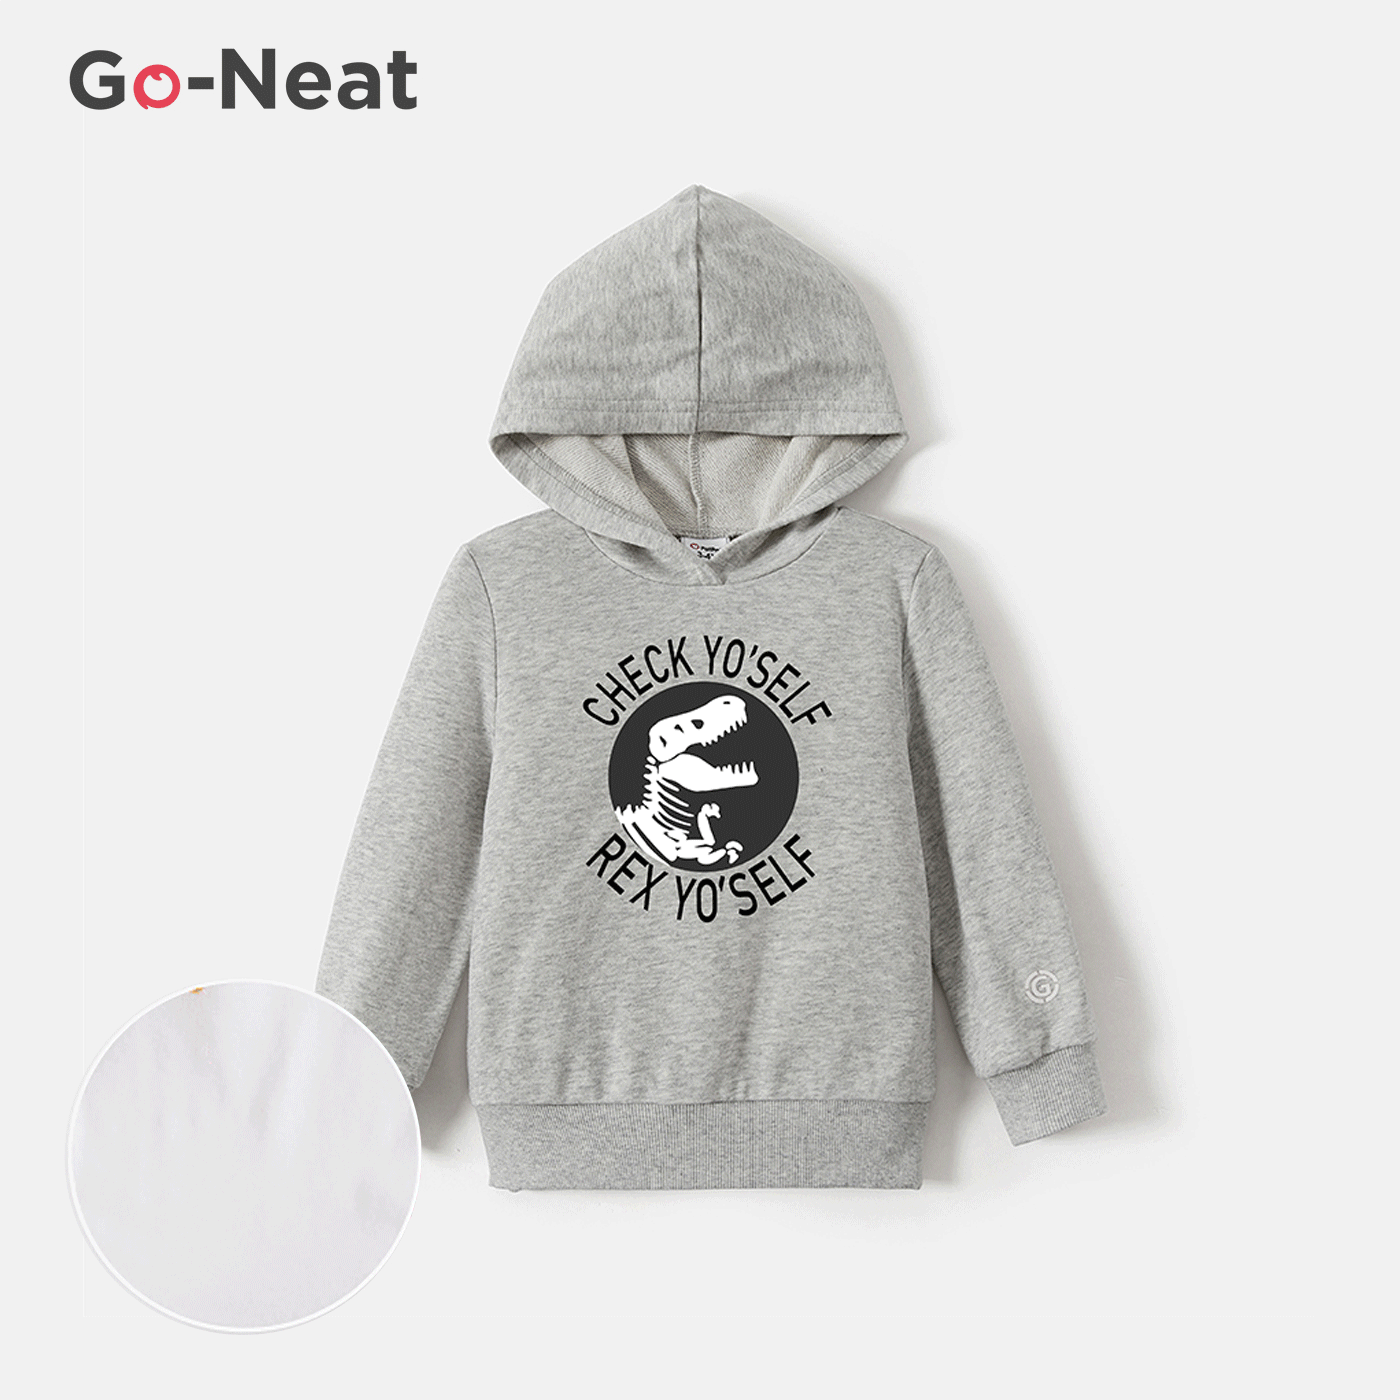 Go-Neat Water Repellent and Stain Resistant Sibling Matching Dinosaur & Letter Print Grey Long-sleeve Hoodies